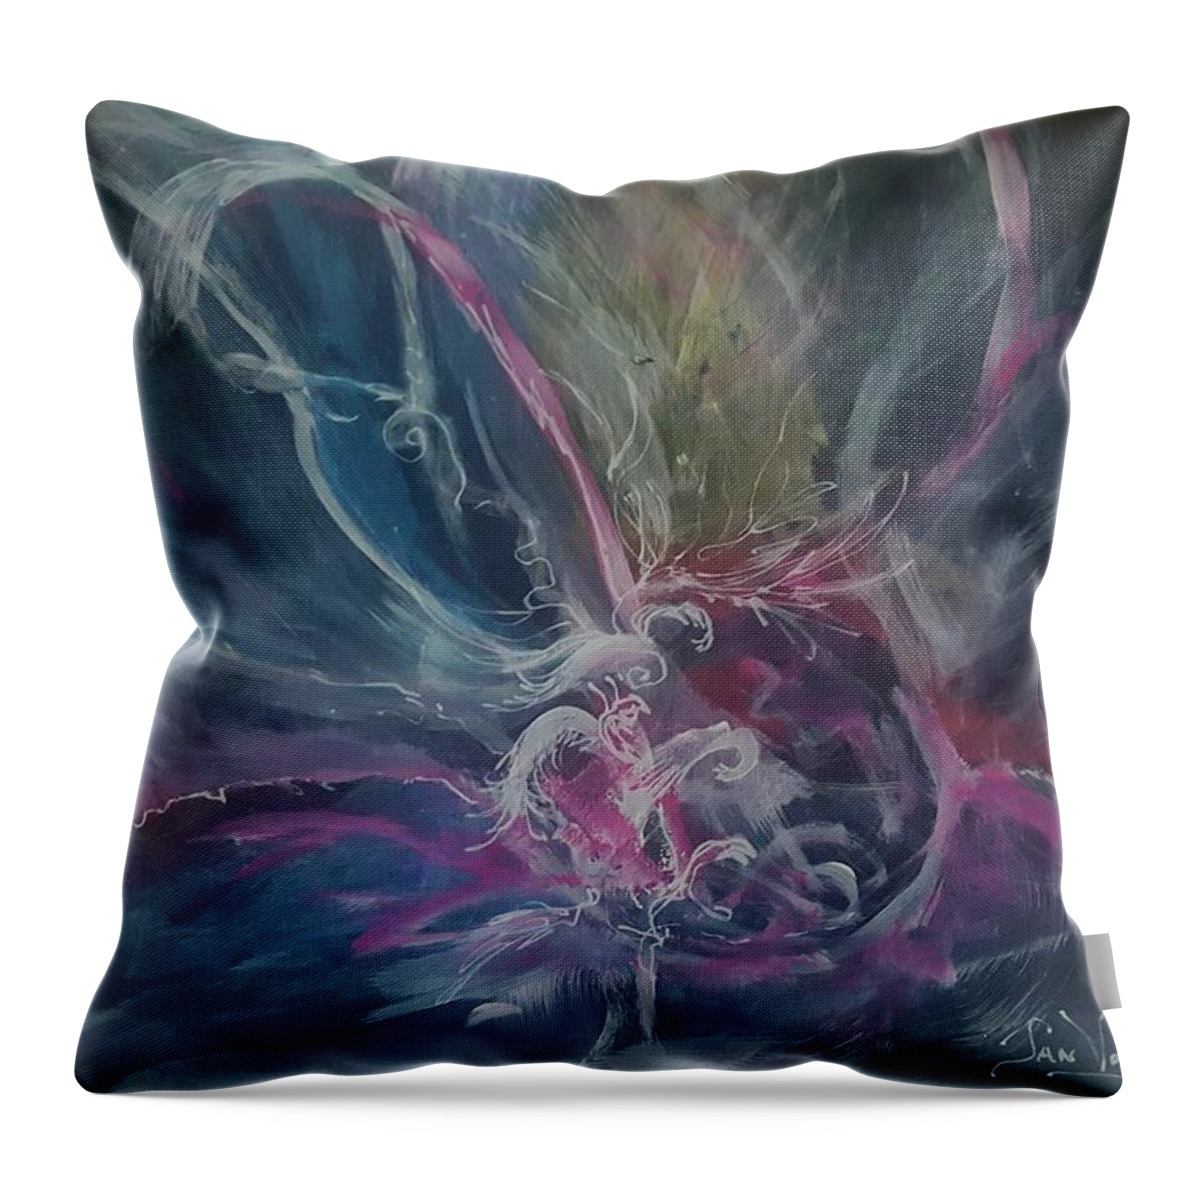 Floral Magenta Greys Throw Pillow featuring the painting Soft Magenta by Jan VonBokel